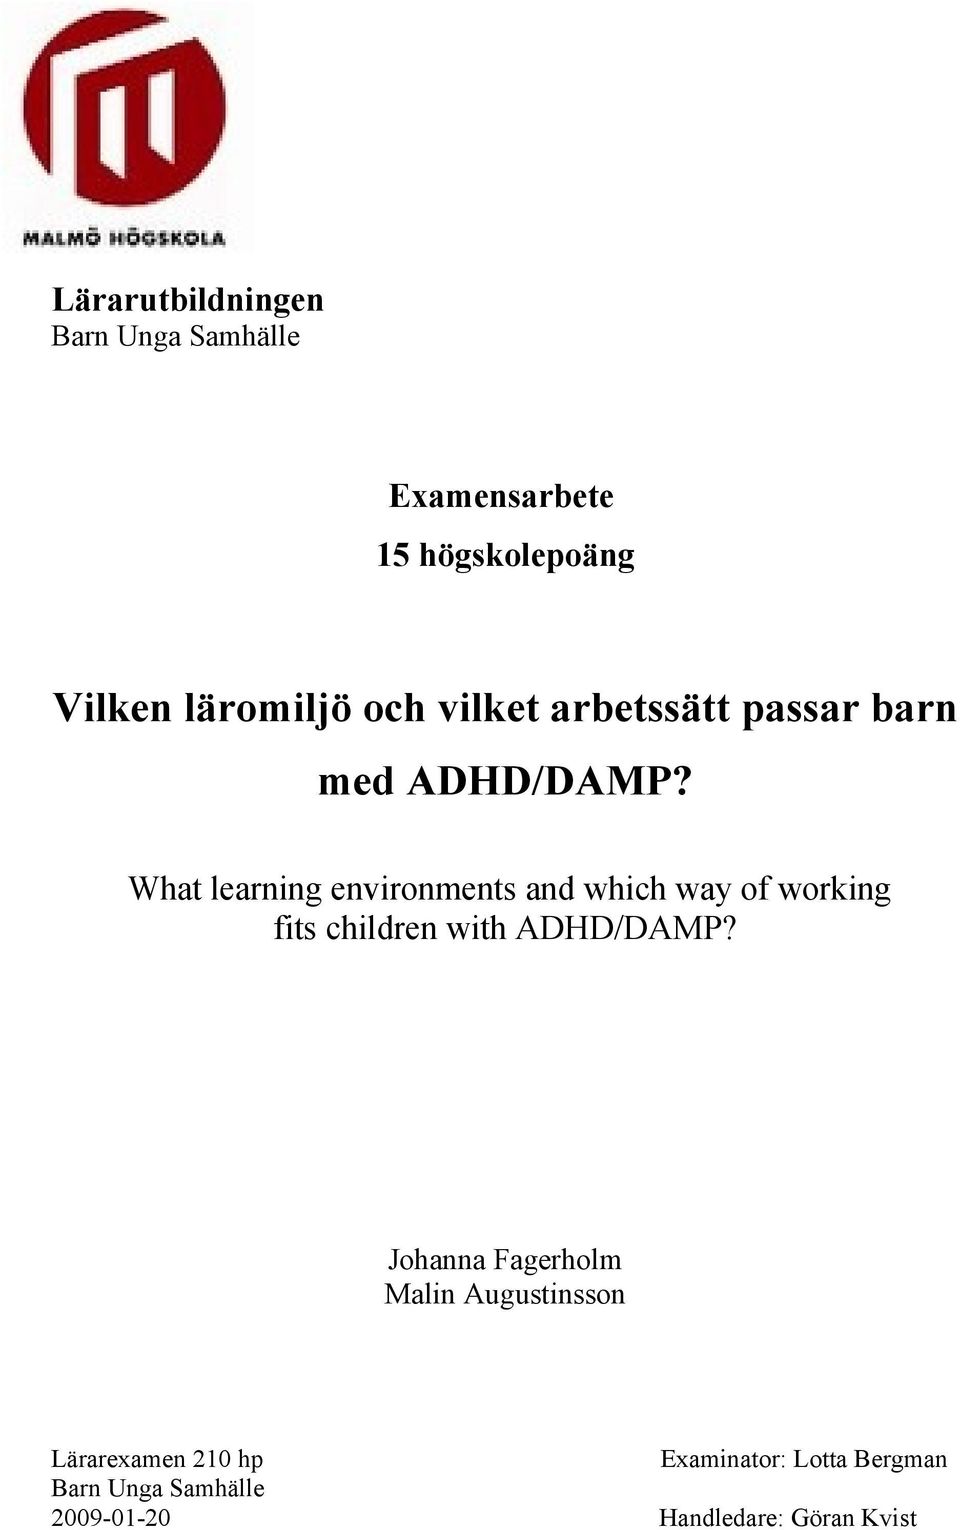 What learning environments and which way of working fits children with ADHD/DAMP?